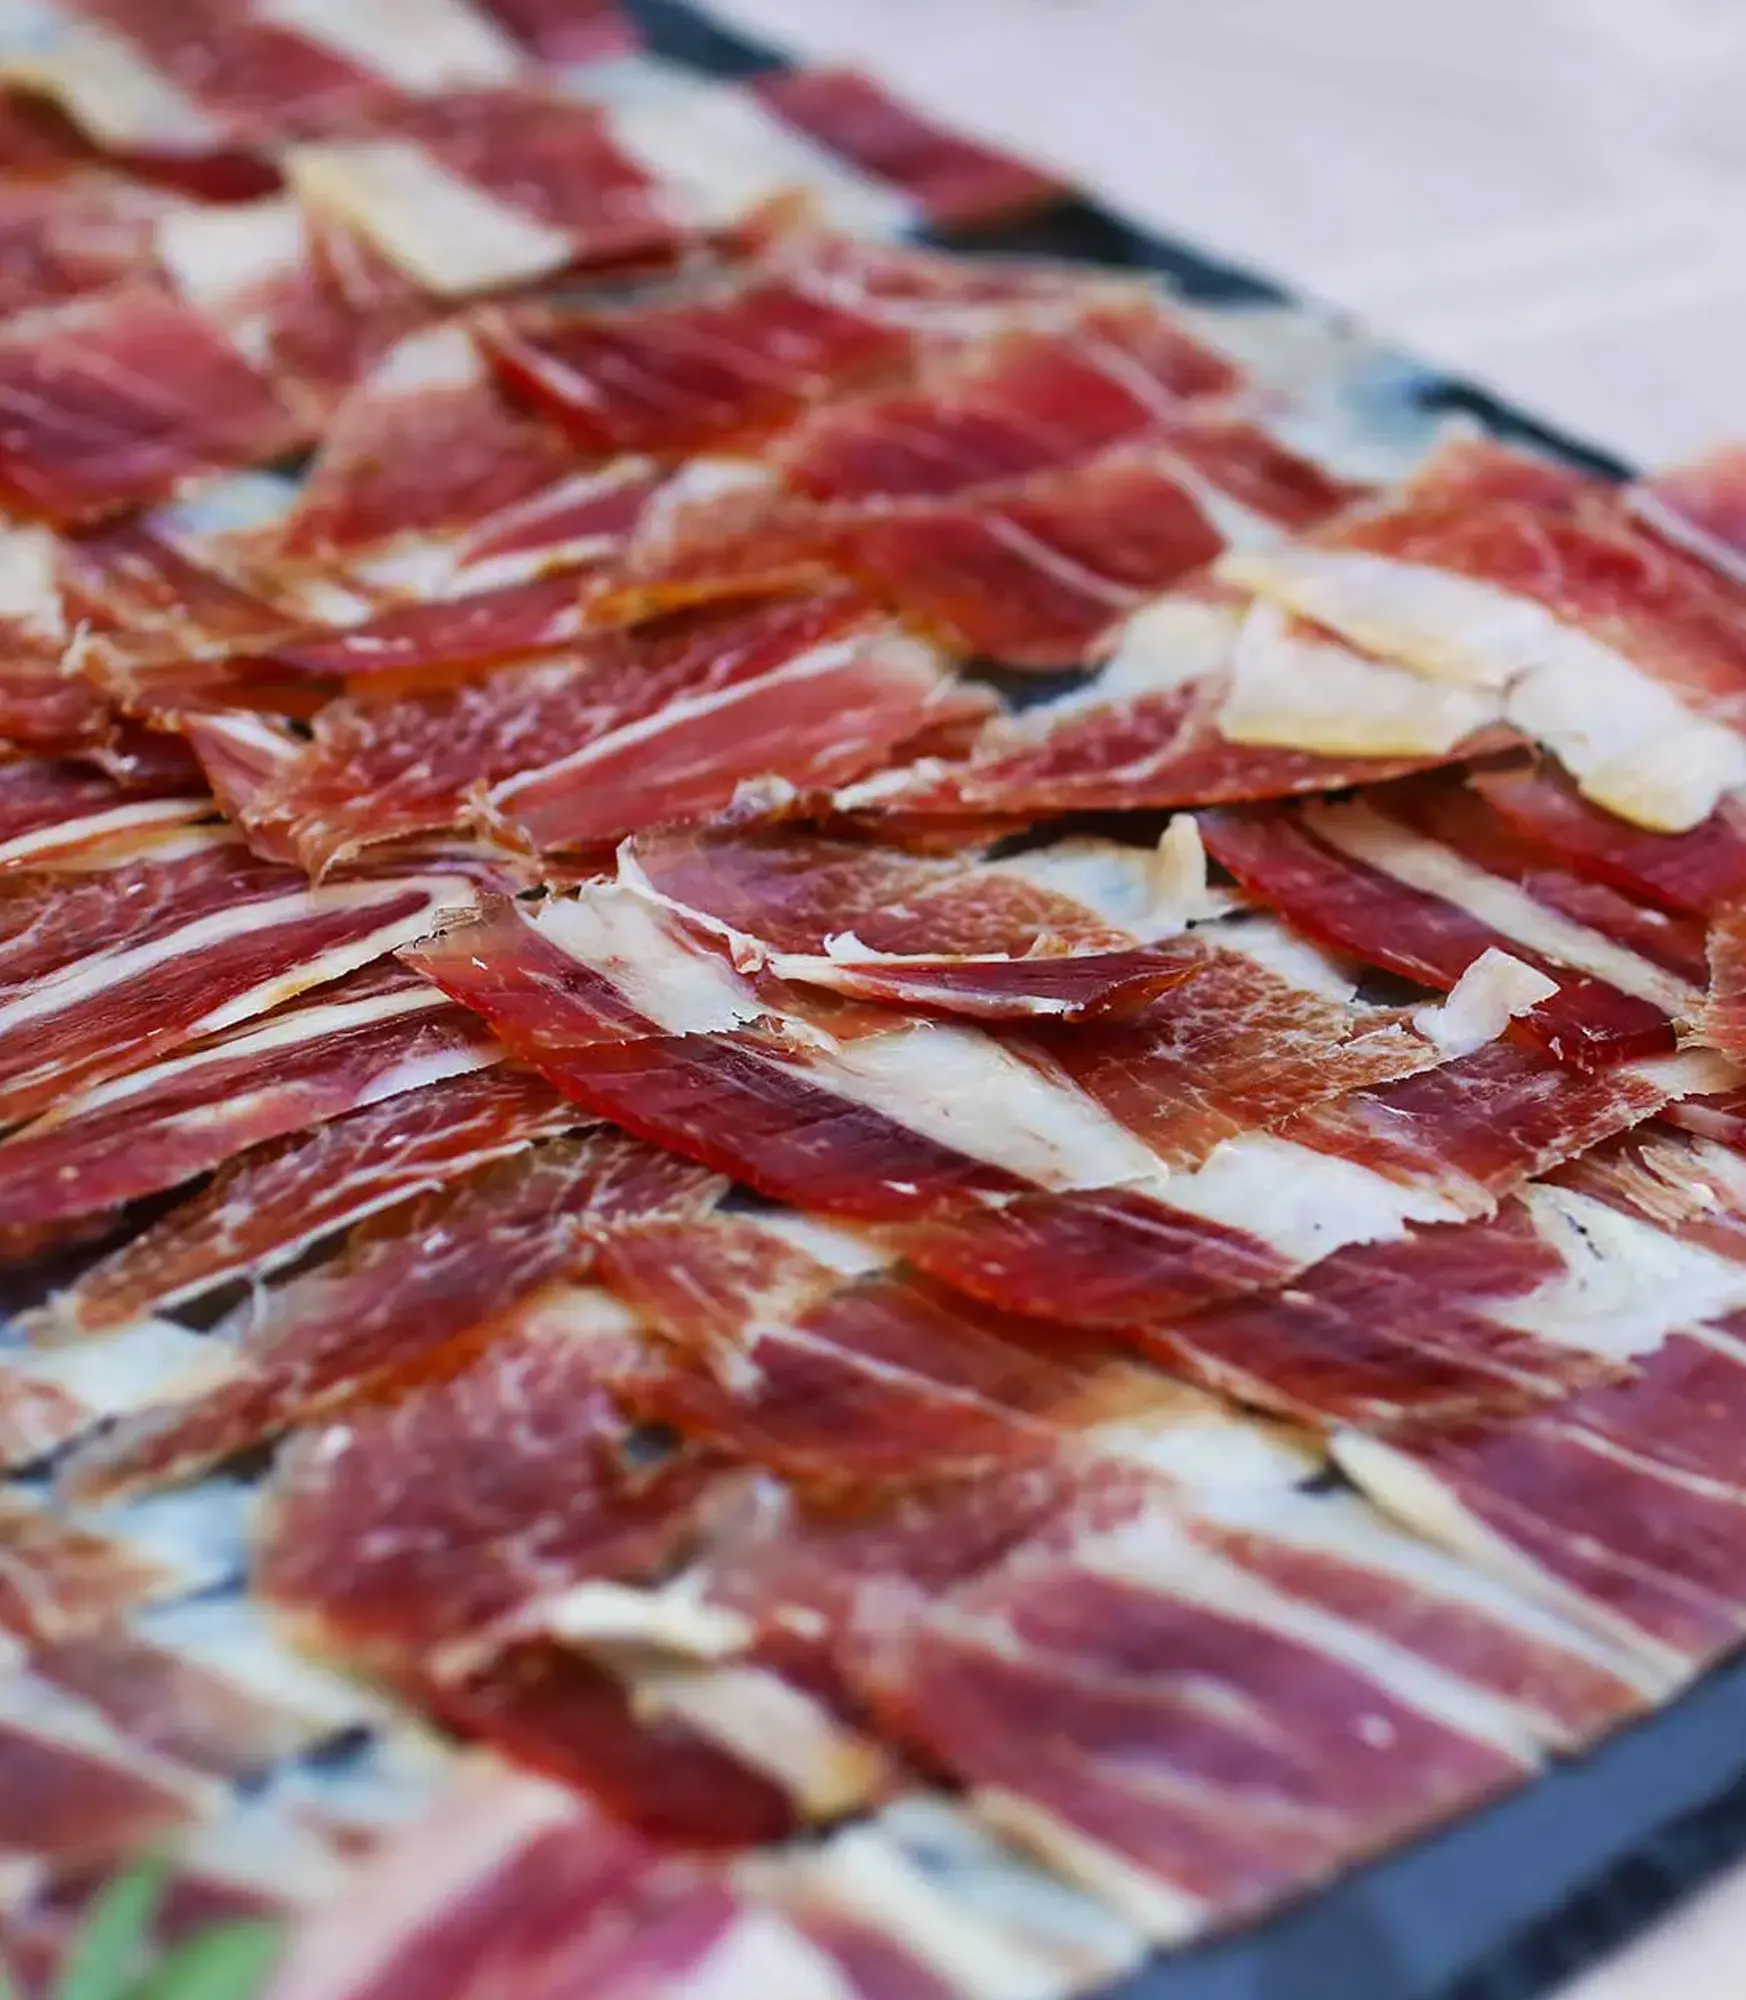 Fermín Iberico a Cut Above An Artisan Jewel With Natural Imperfections